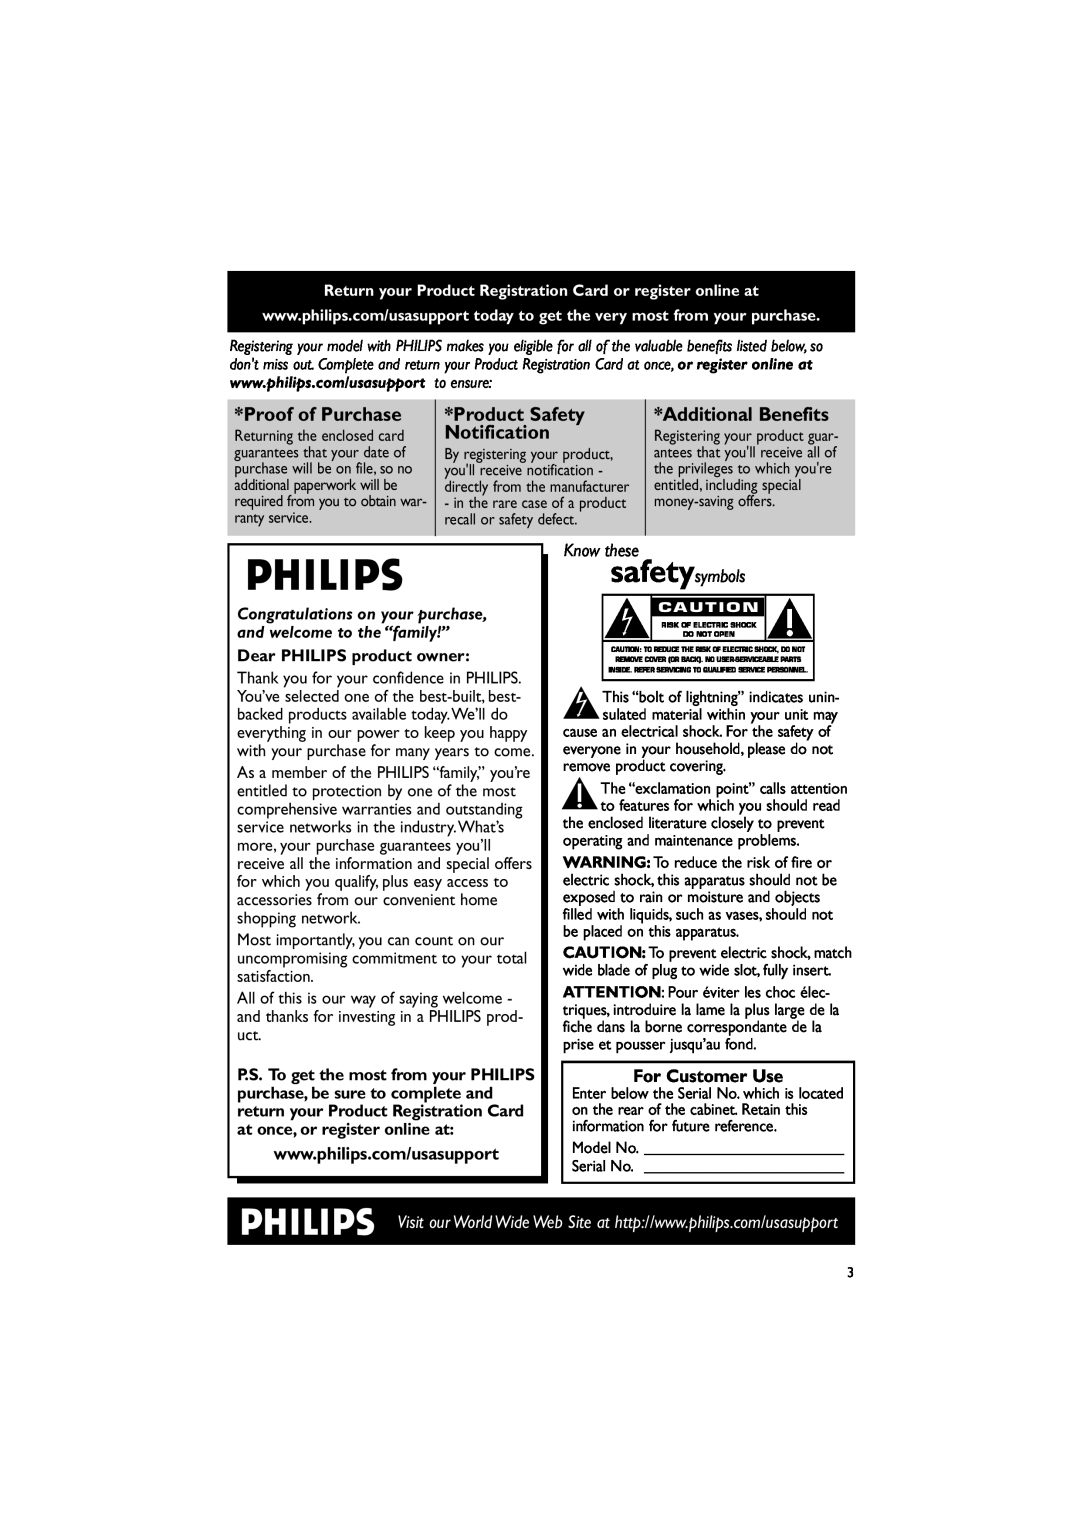 Philips MCD139B Proof of Purchase, Product Safety, Additional Benefits, Notification, Dear PHILIPS product owner 